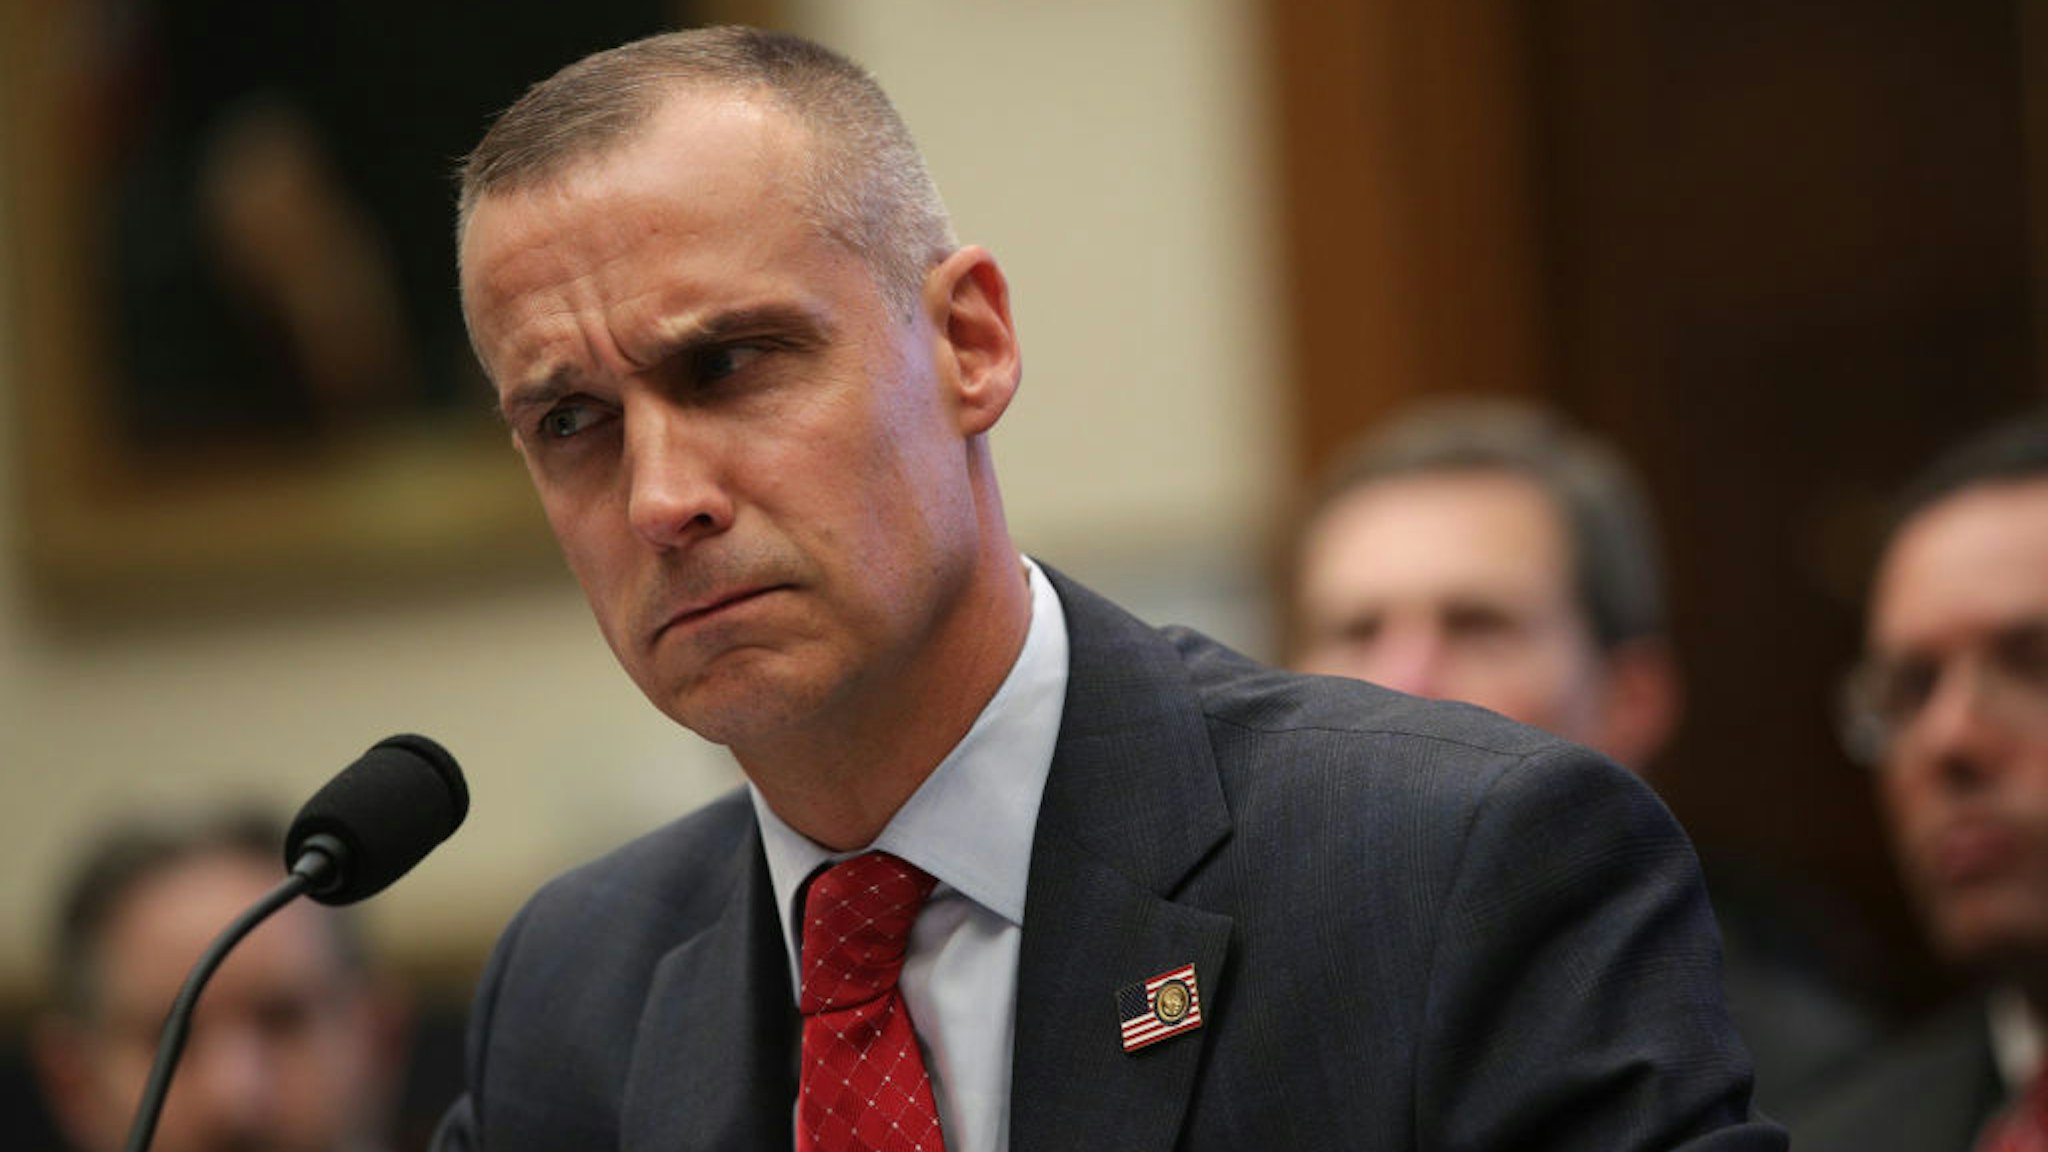 Former Trump campaign manager Corey Lewandowski testifies during a hearing before the House Judiciary Committee in the Rayburn House Office Building on Capitol Hill September 17, 2019 in Washington, DC.